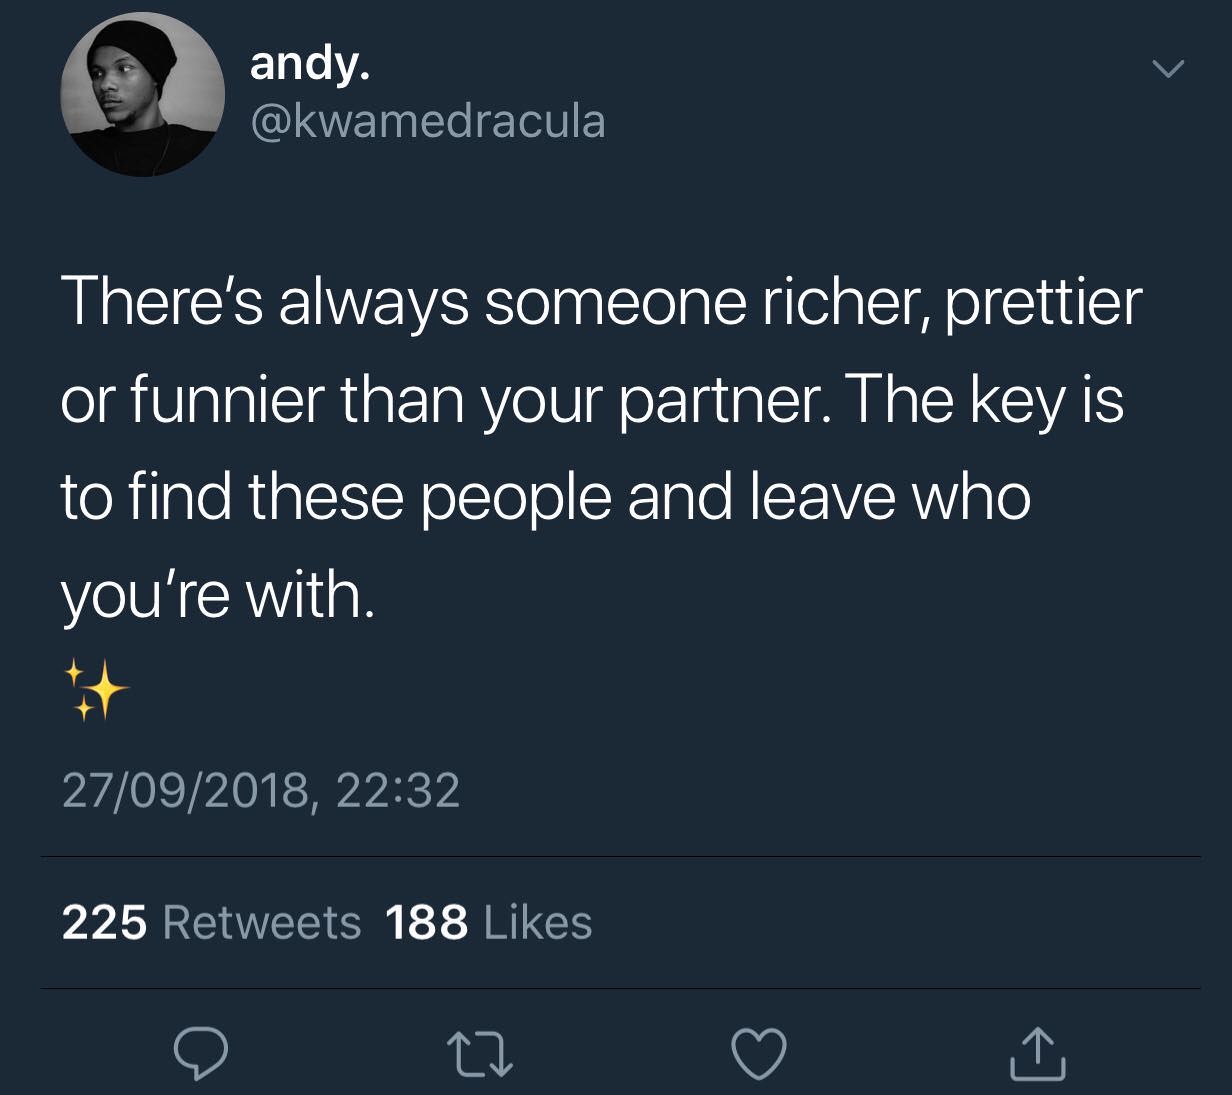 black twitter girls cheat - andy. andy. There's always someone richer, prettier or funnier than your partner. The key is to find these people and leave who you're with. 27092018, 225 188 o 22